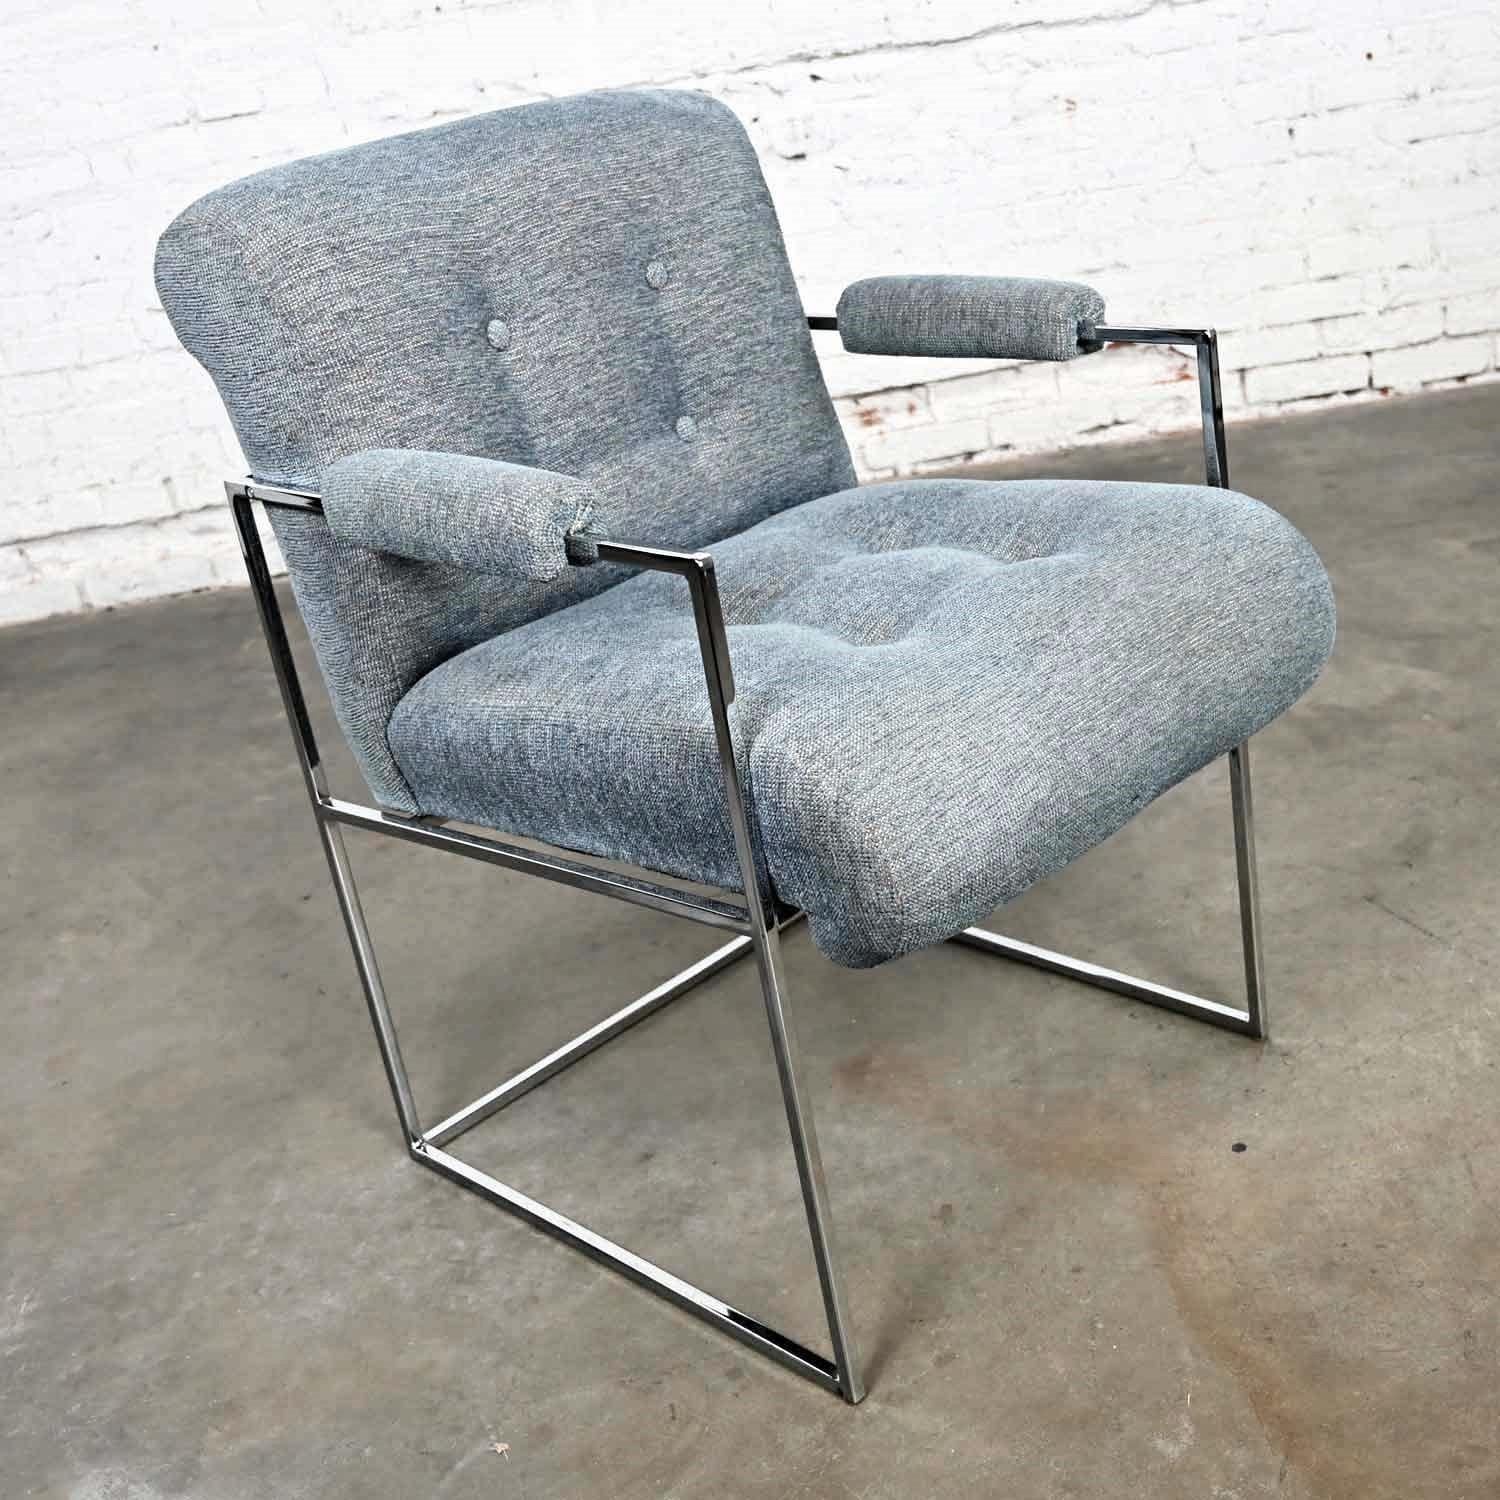 Handsome vintage modern chrome frame & original blue gray fabric with button detail Thin Line armchair by Milo Baughman for Thayer Coggin. This one is missing its tag however we have identified it through online sources and measurements. Beautiful